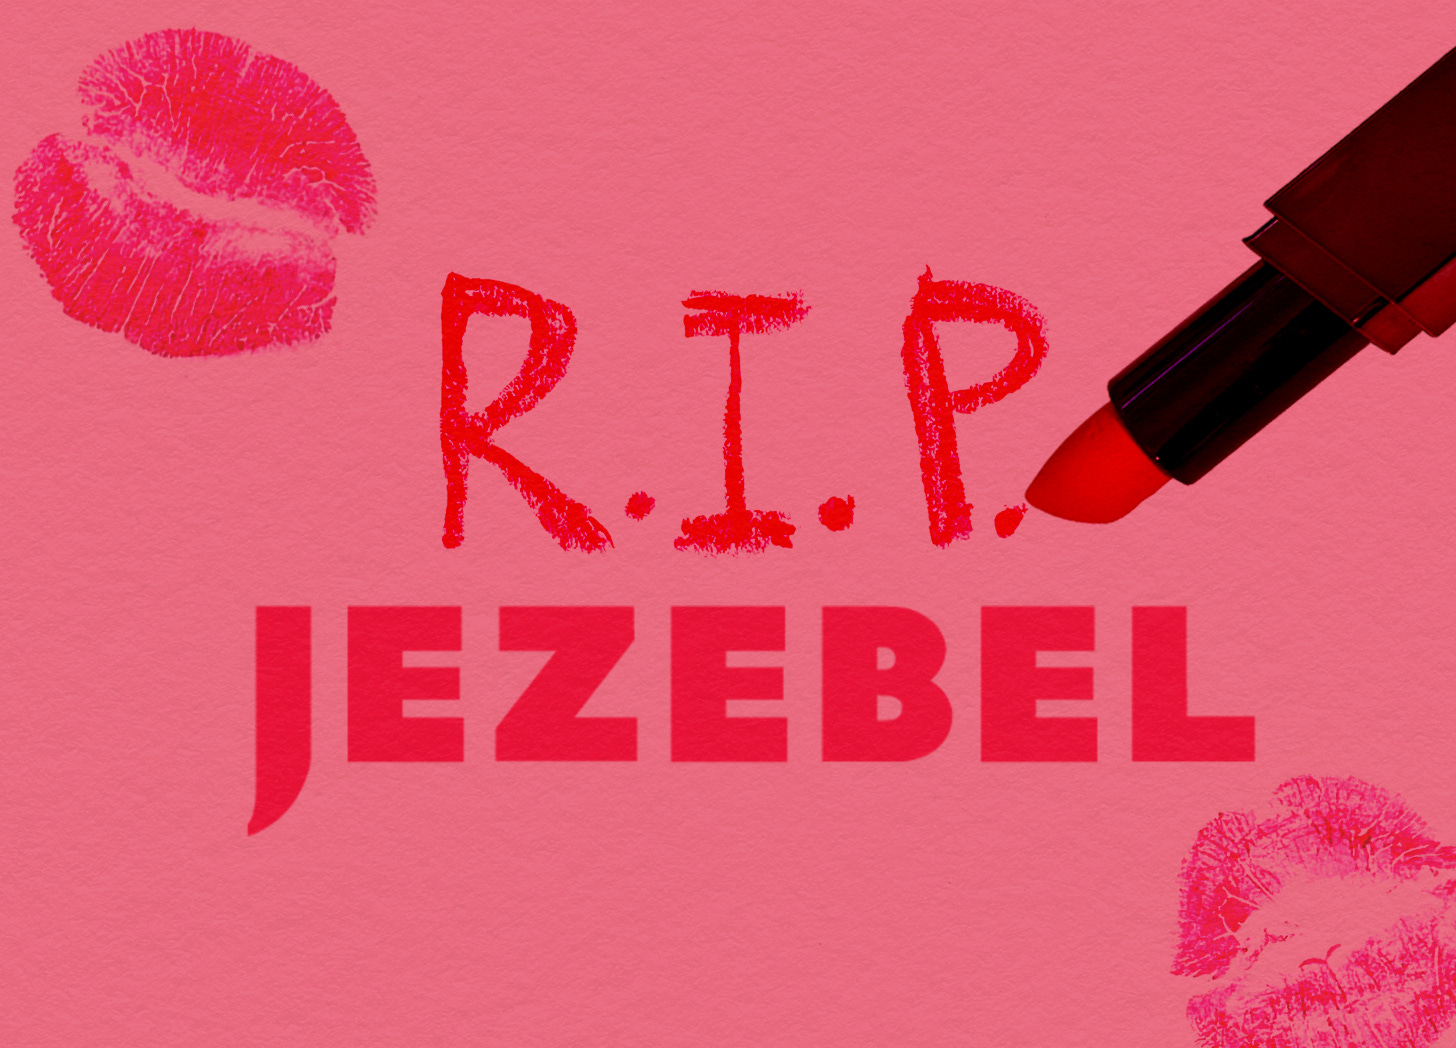 A photo illustration on a pink background with two lip prints. A tube of lipstick has written out "R. I. P." above the logo for defunct feminist website Jezebel